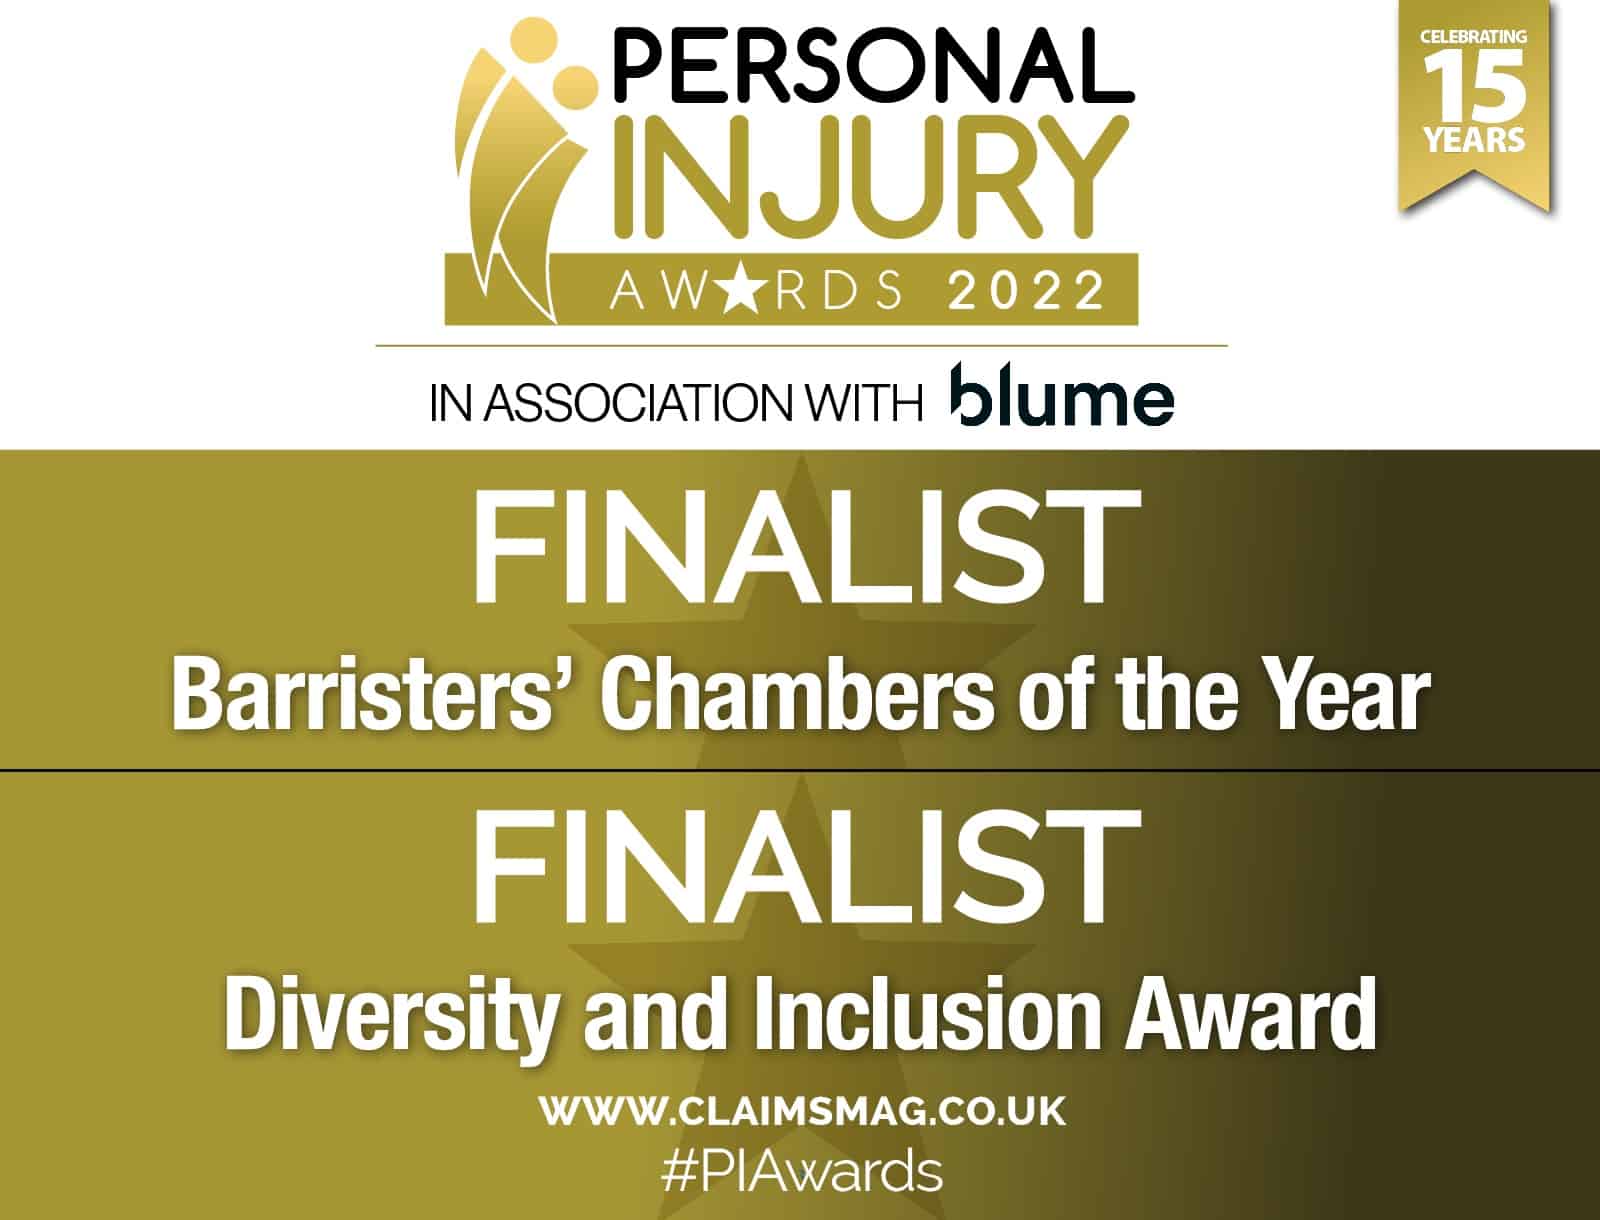 Parklane Plowden Chambers shortlisted for Barristers’ Chambers of the Year and for the Diversity and Inclusion Award 2022